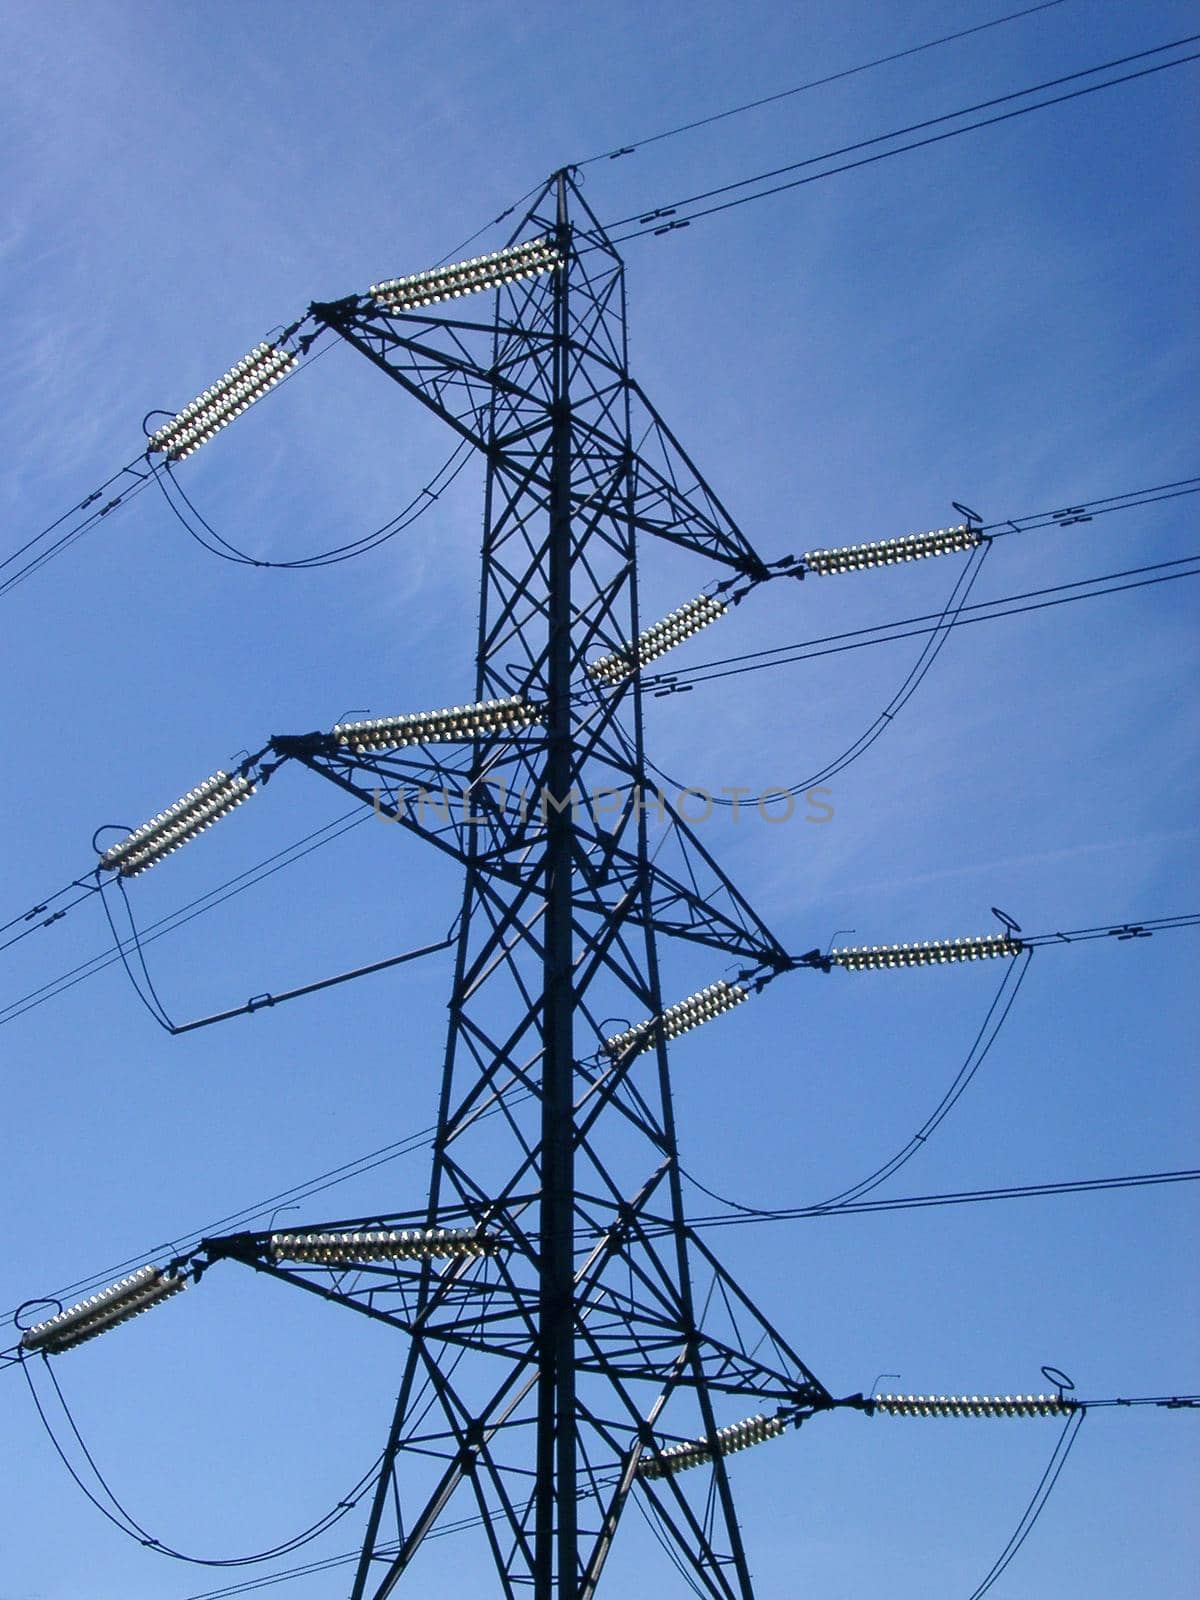 Detail of the top of an electricity pylon, showing all the connecting cables, against a clear blue sky